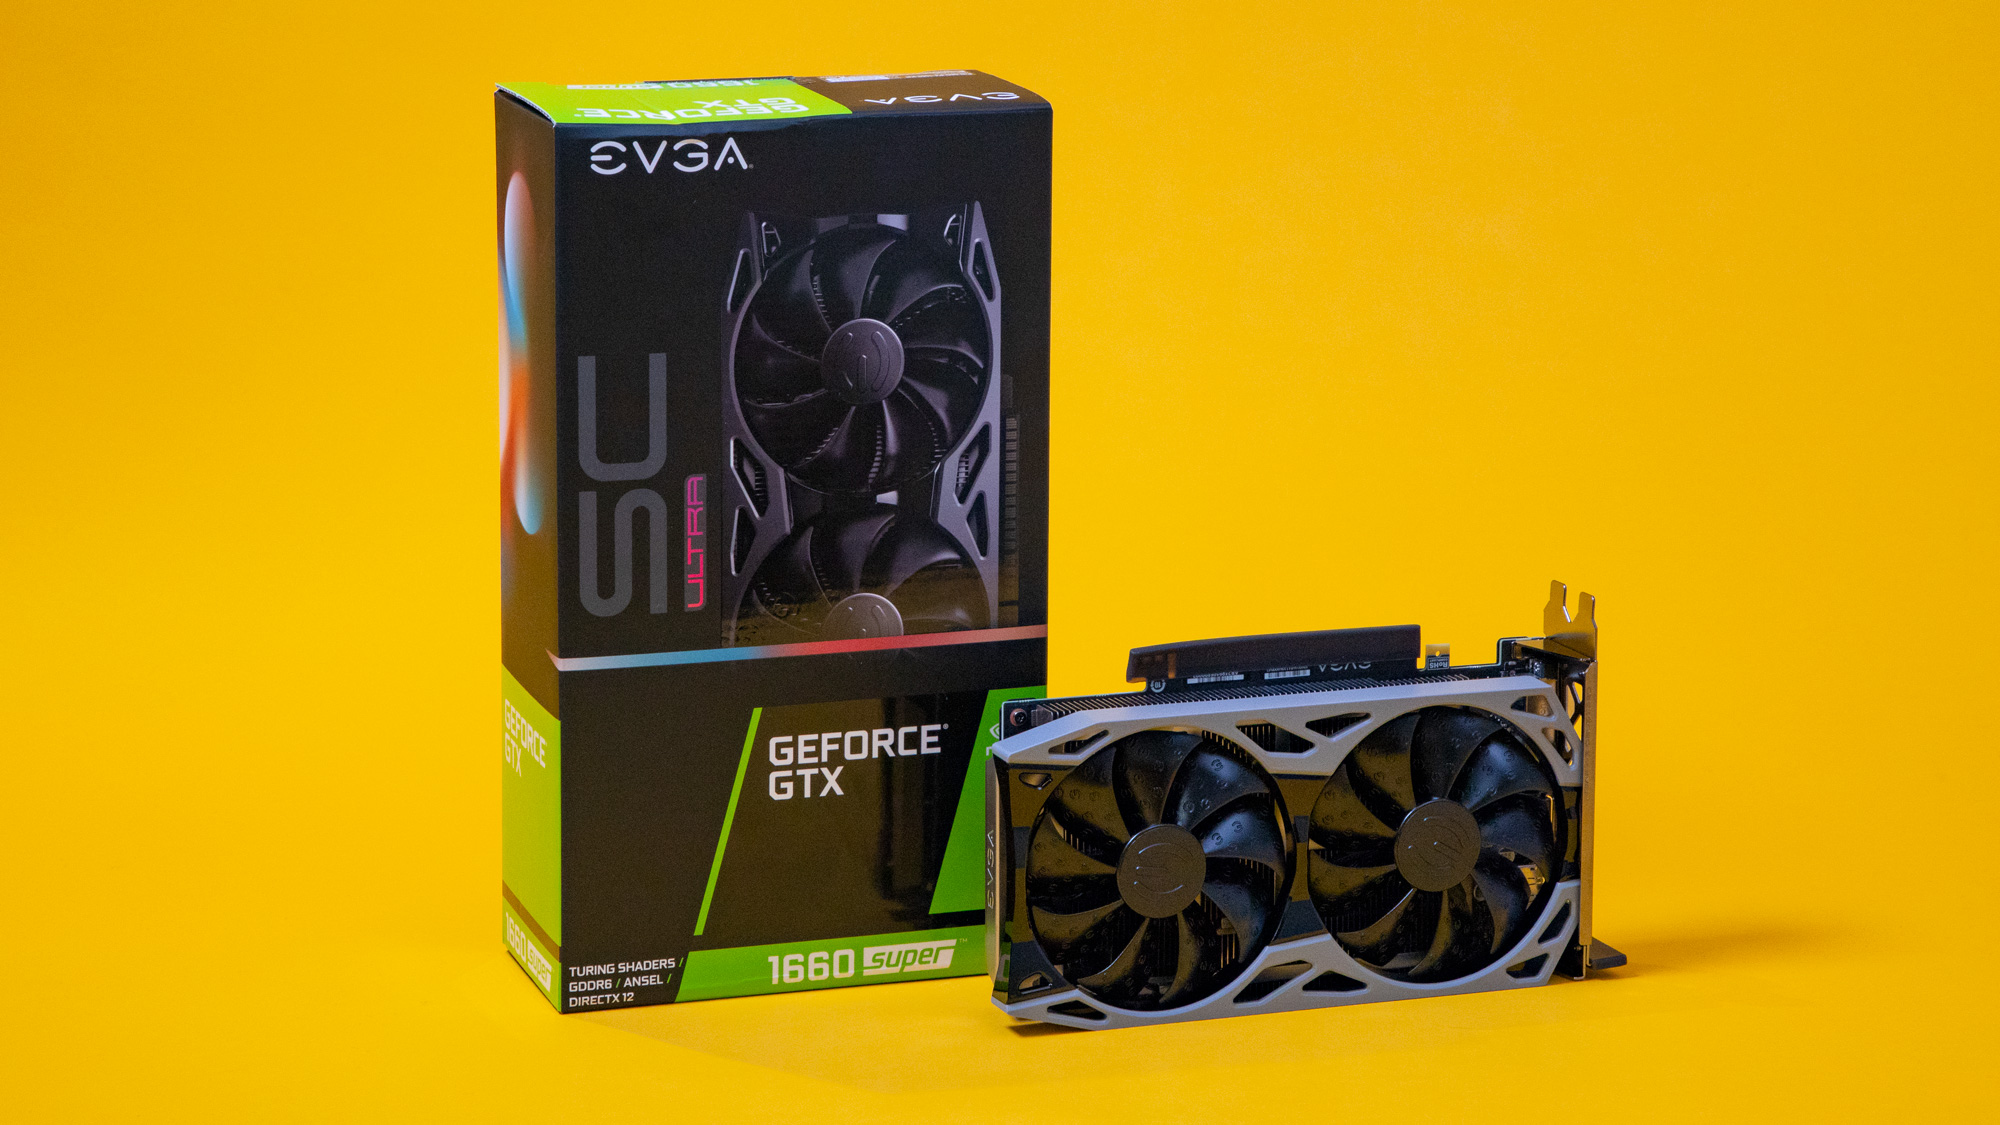 The retail packaging and the physical Nvidia GeForce GTX 1660 Super graphics card against a yellow background